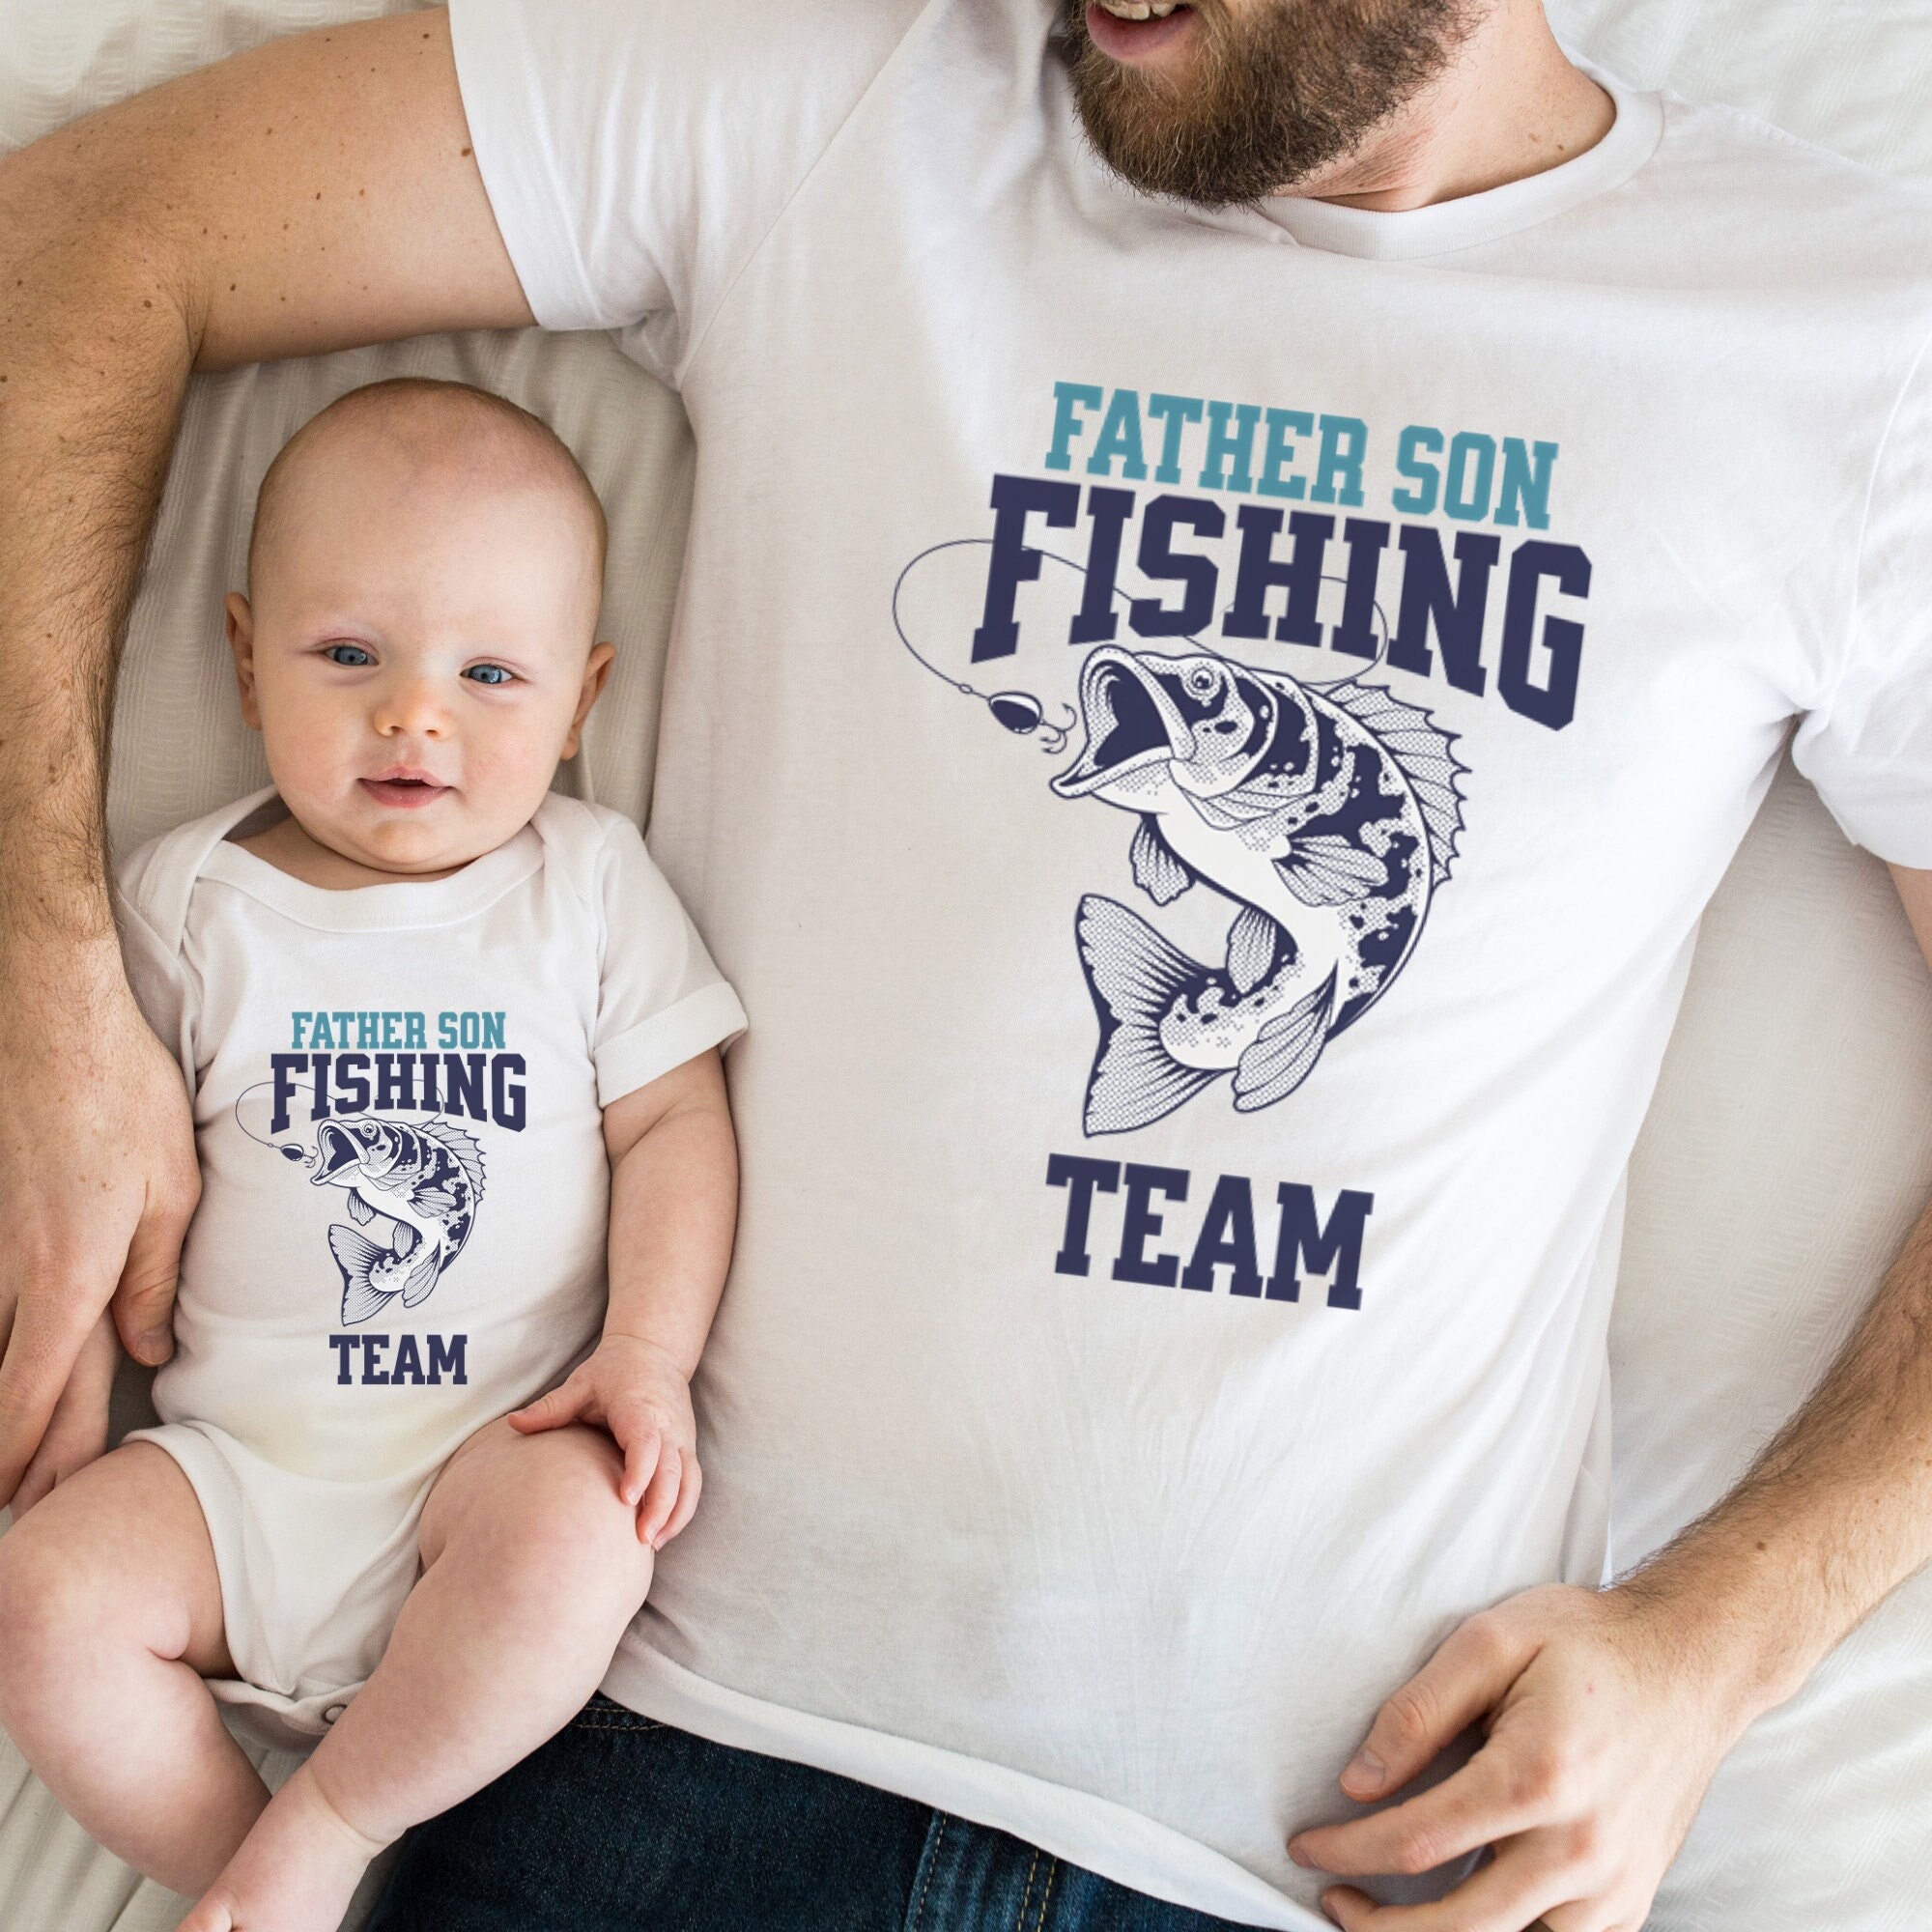 Buy Father Son Matching Shirts Fishing Online In India -  India